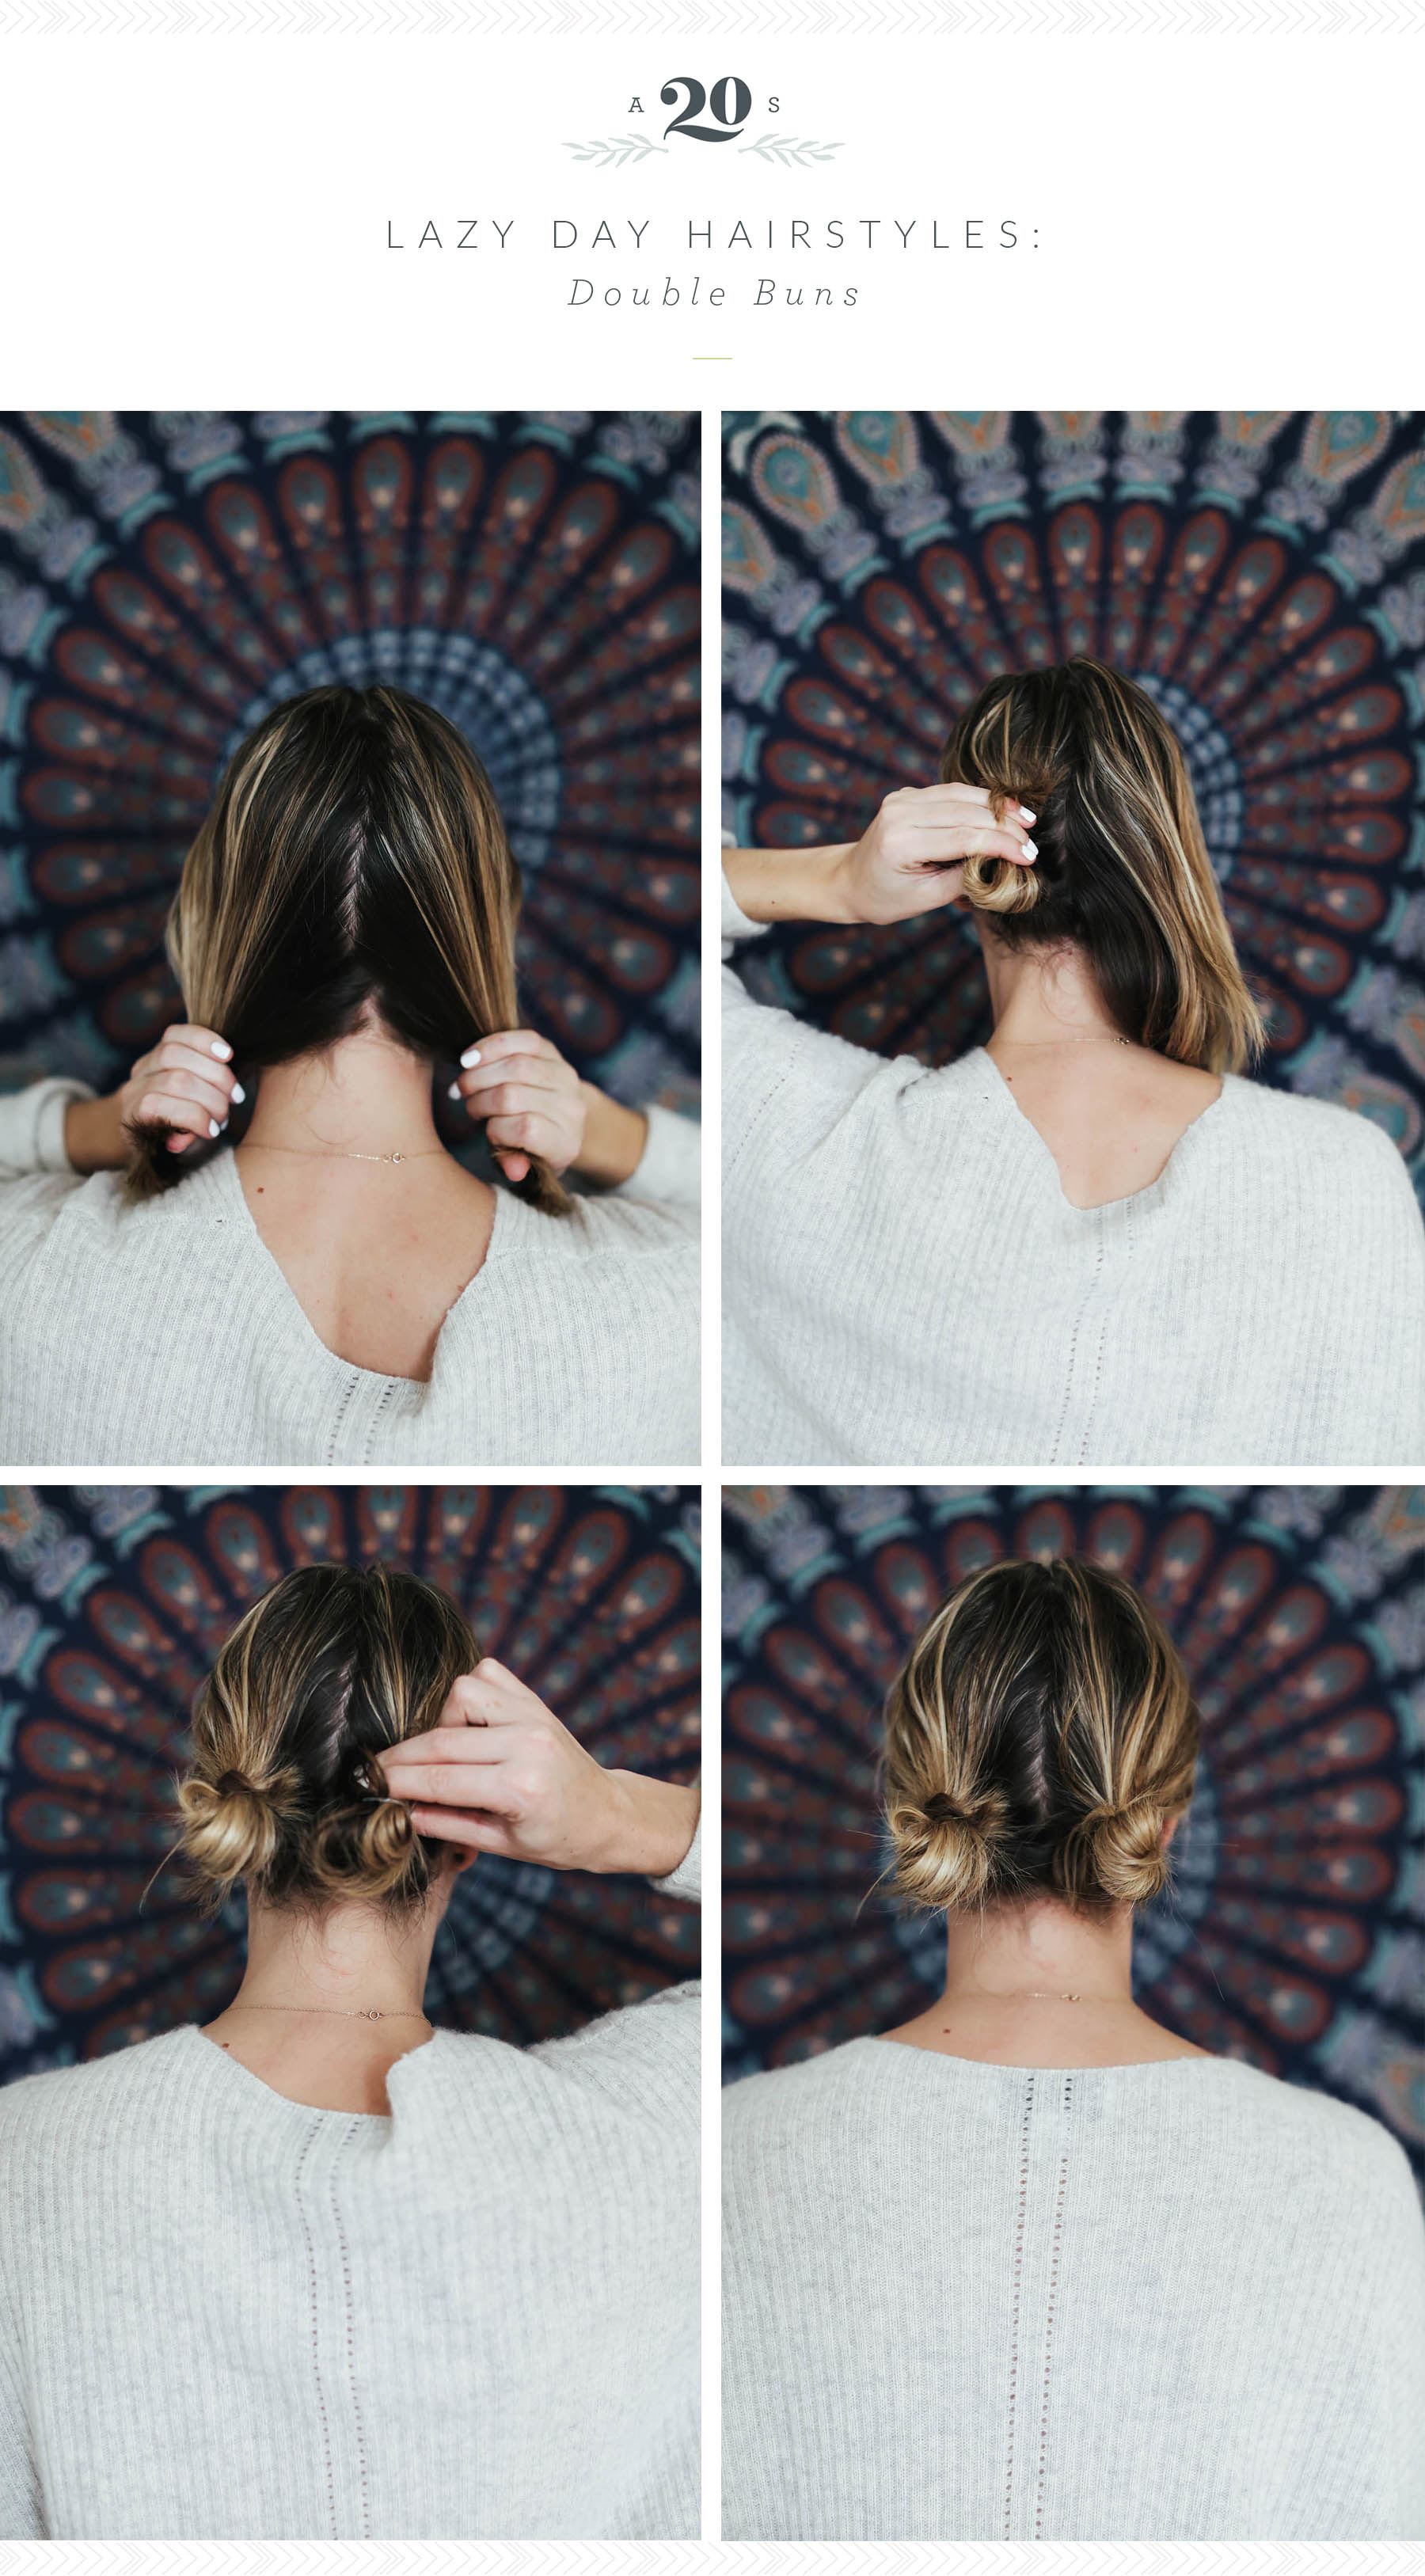 15 Ways to Have a Simple Hairstyle for School (Long Hair)